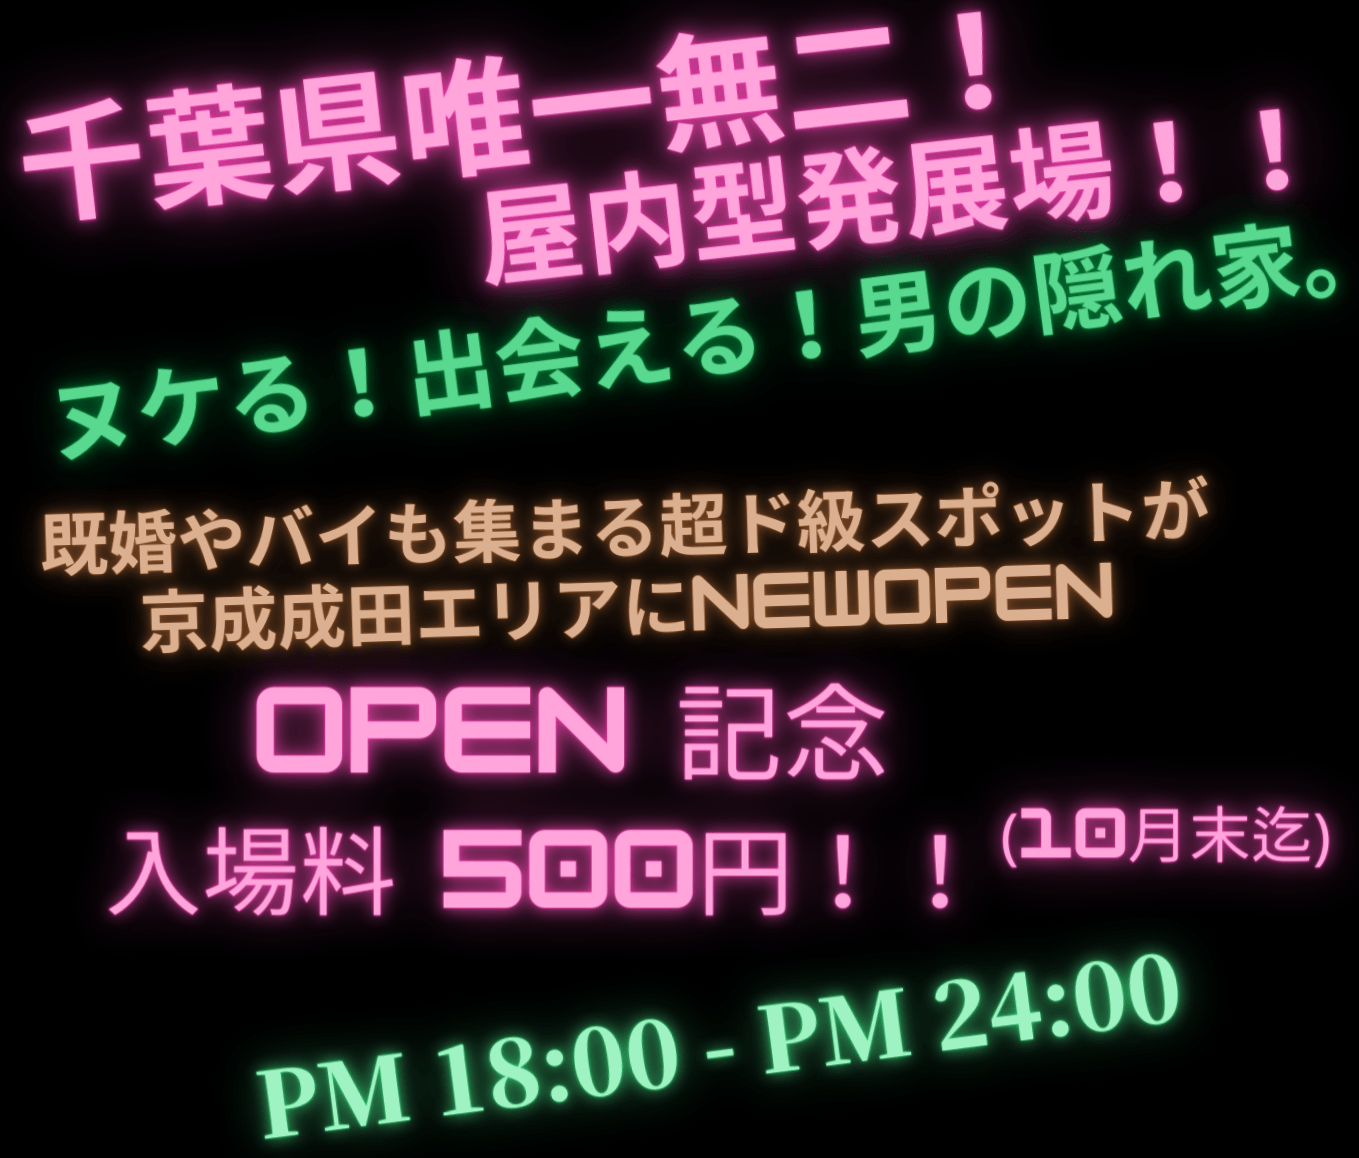 Open記念！500円で入場♪できます♪